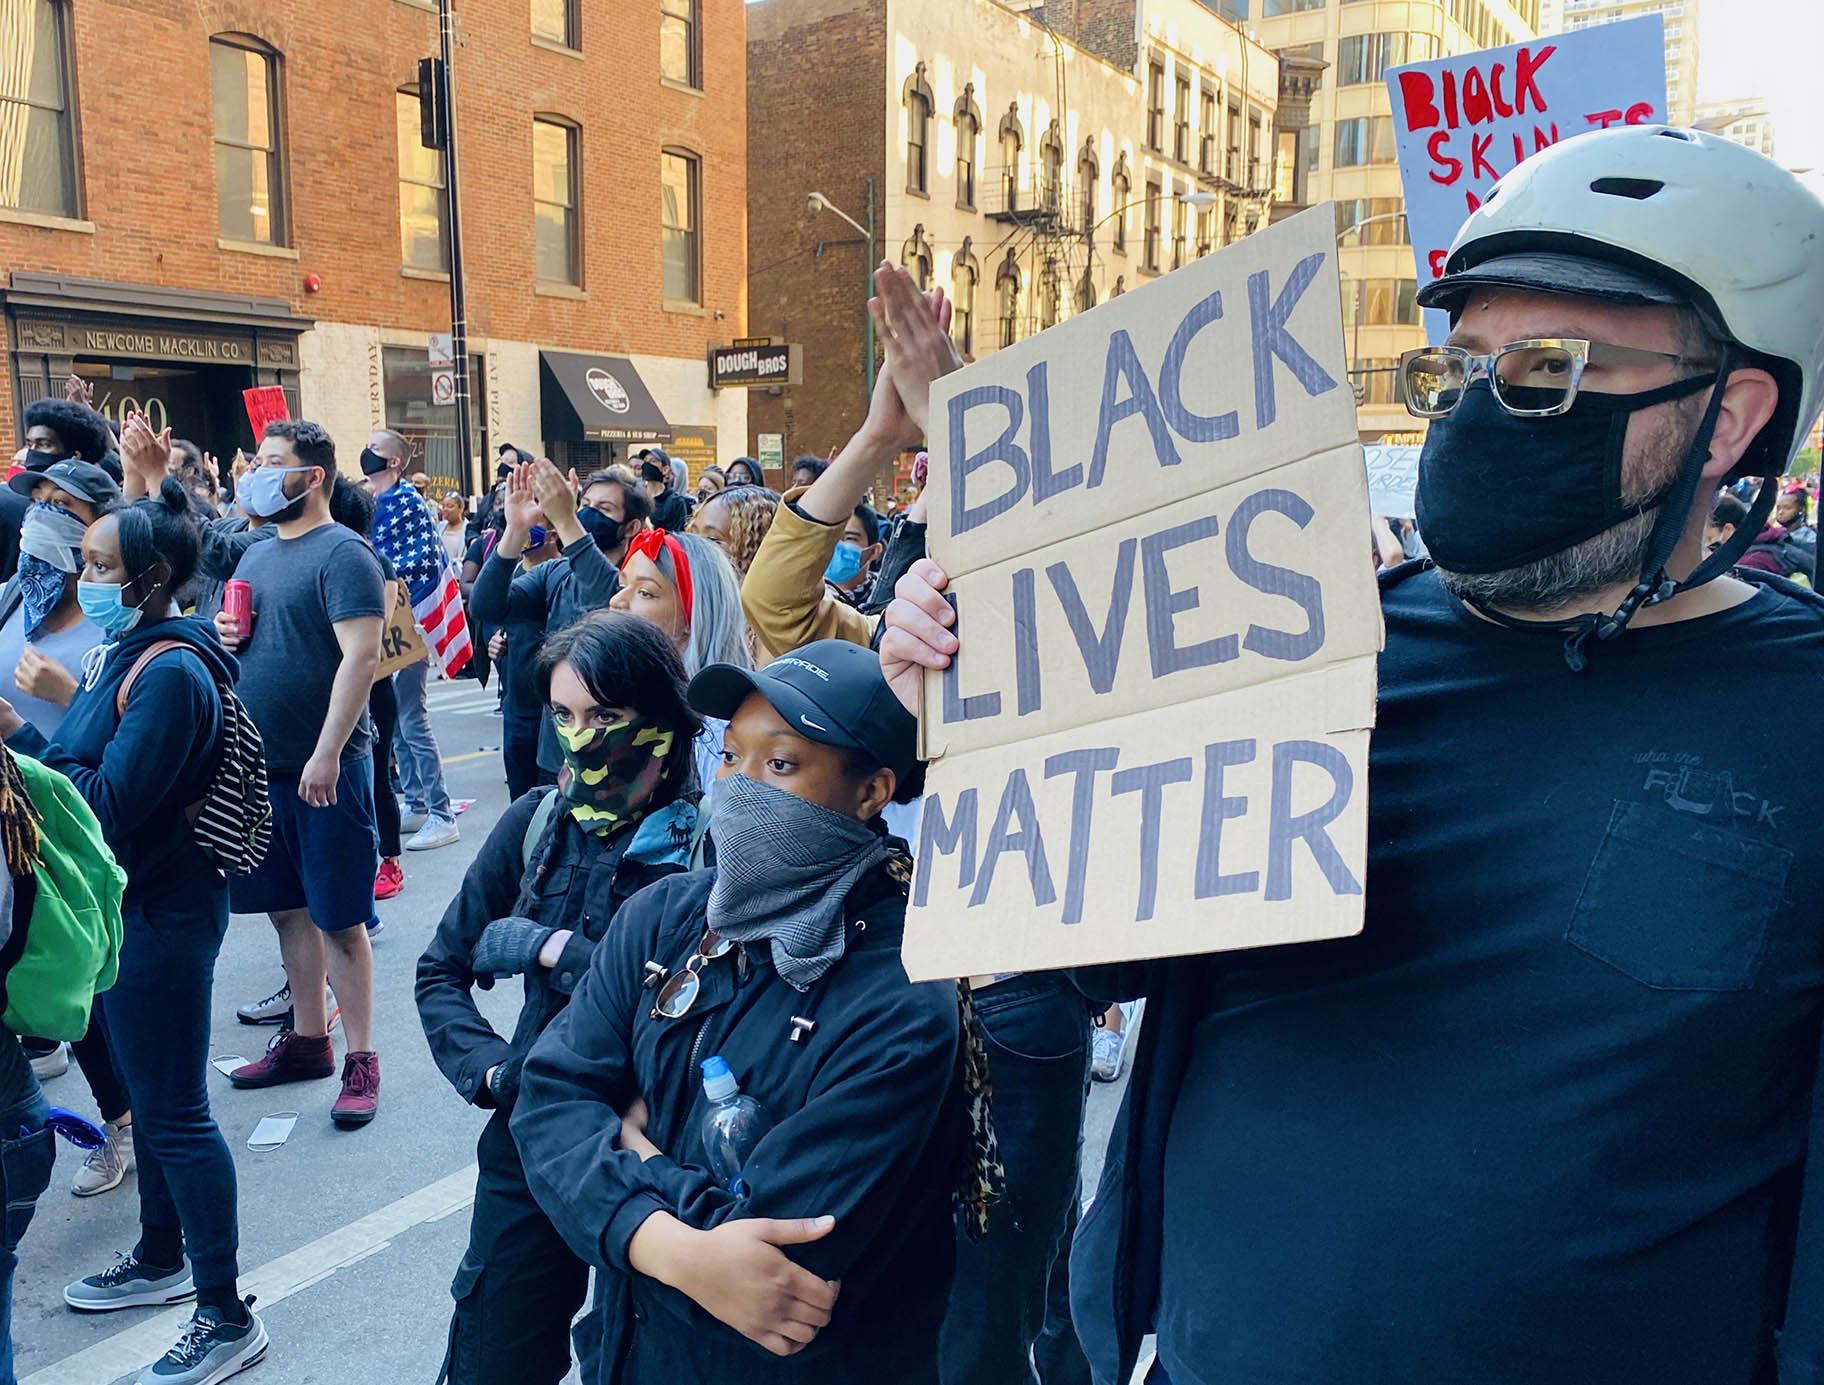 Protesters wear masks in Chicago on Saturday, May 30, 2020, but health officials worry that large gatherings could lead to a spike in the number of COVID-19 infections. (Hugo Balta / WTTW News)